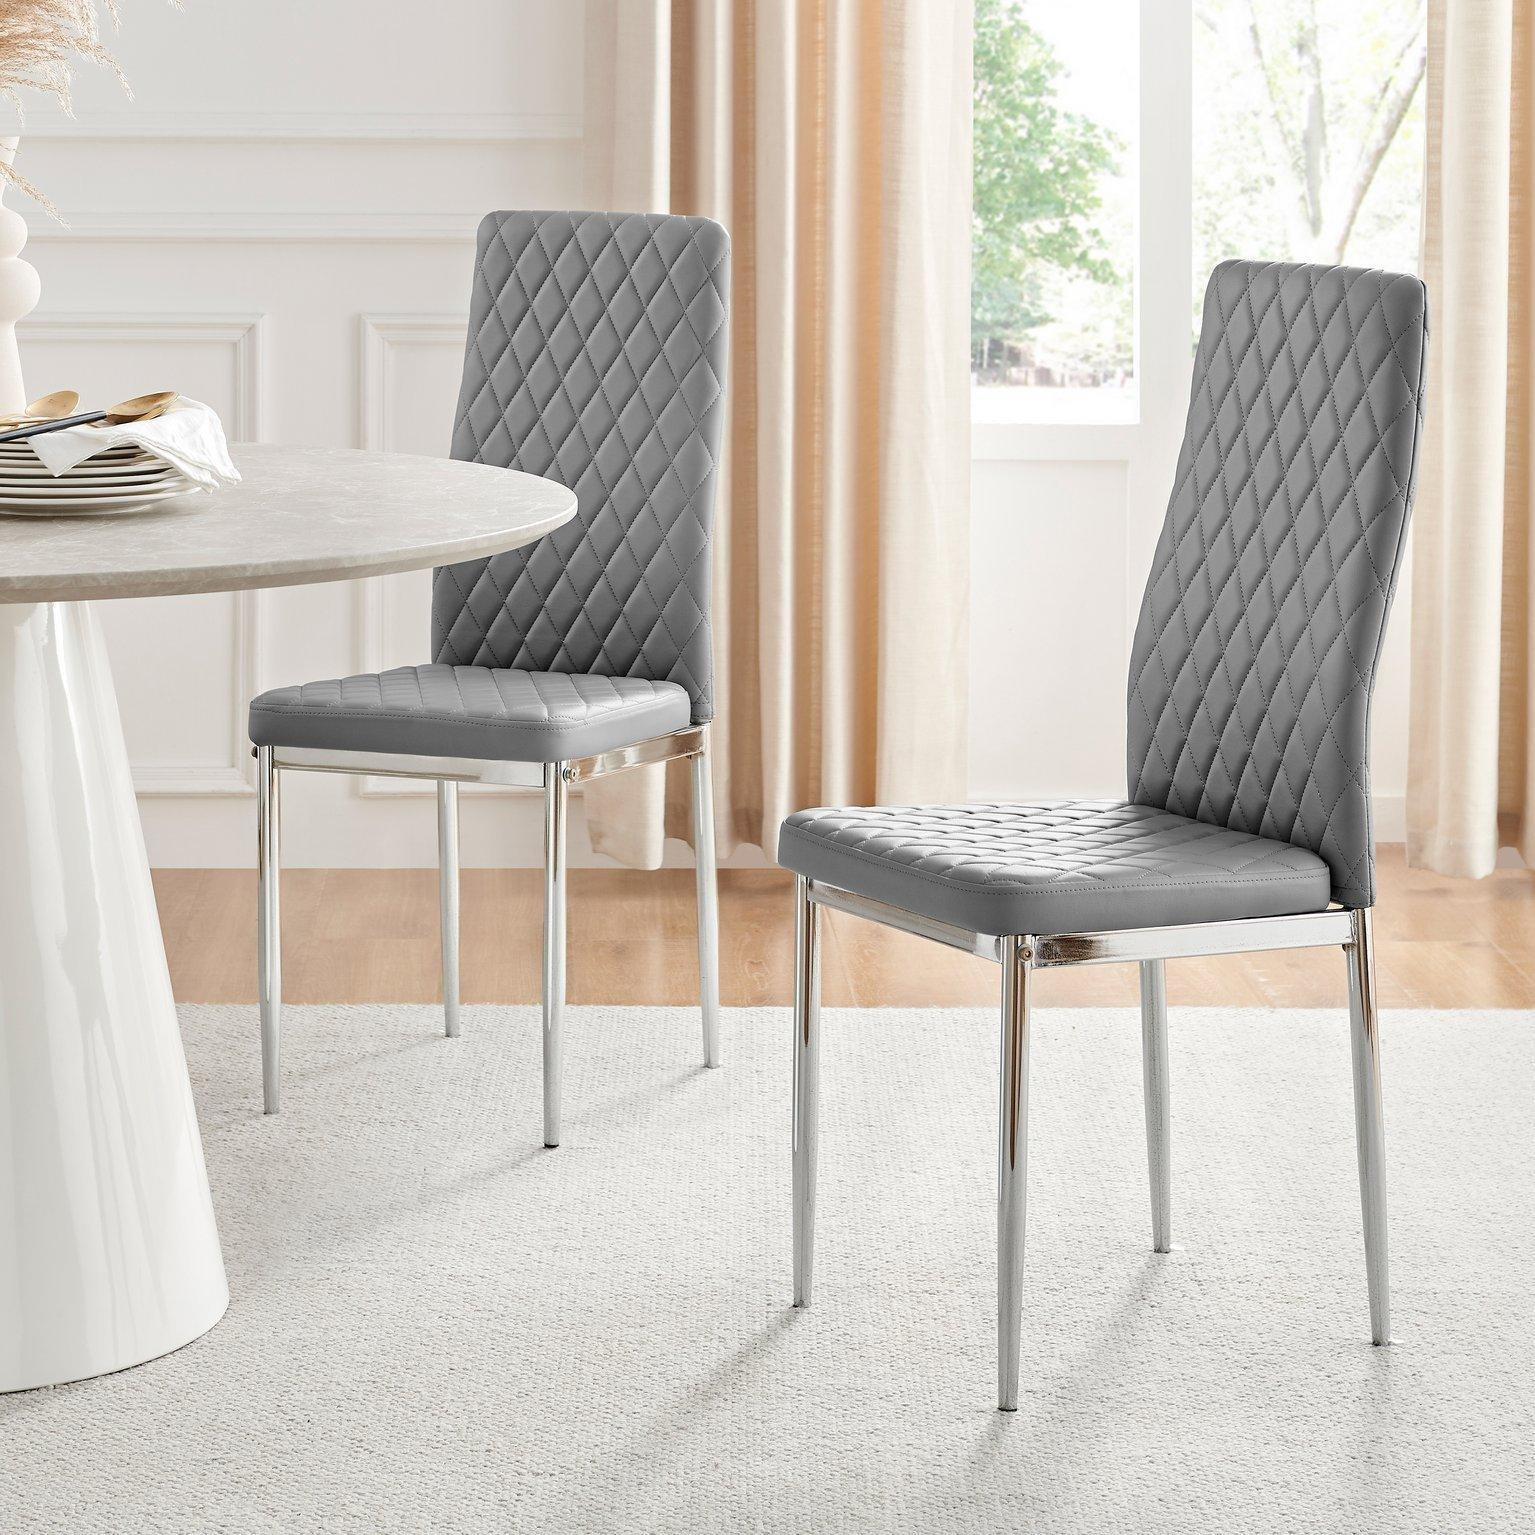 Set of 6 Milan High Back Soft Touch Diamond Pattern Faux Leather Dining Chairs With Silver Chrome Metal Legs - image 1